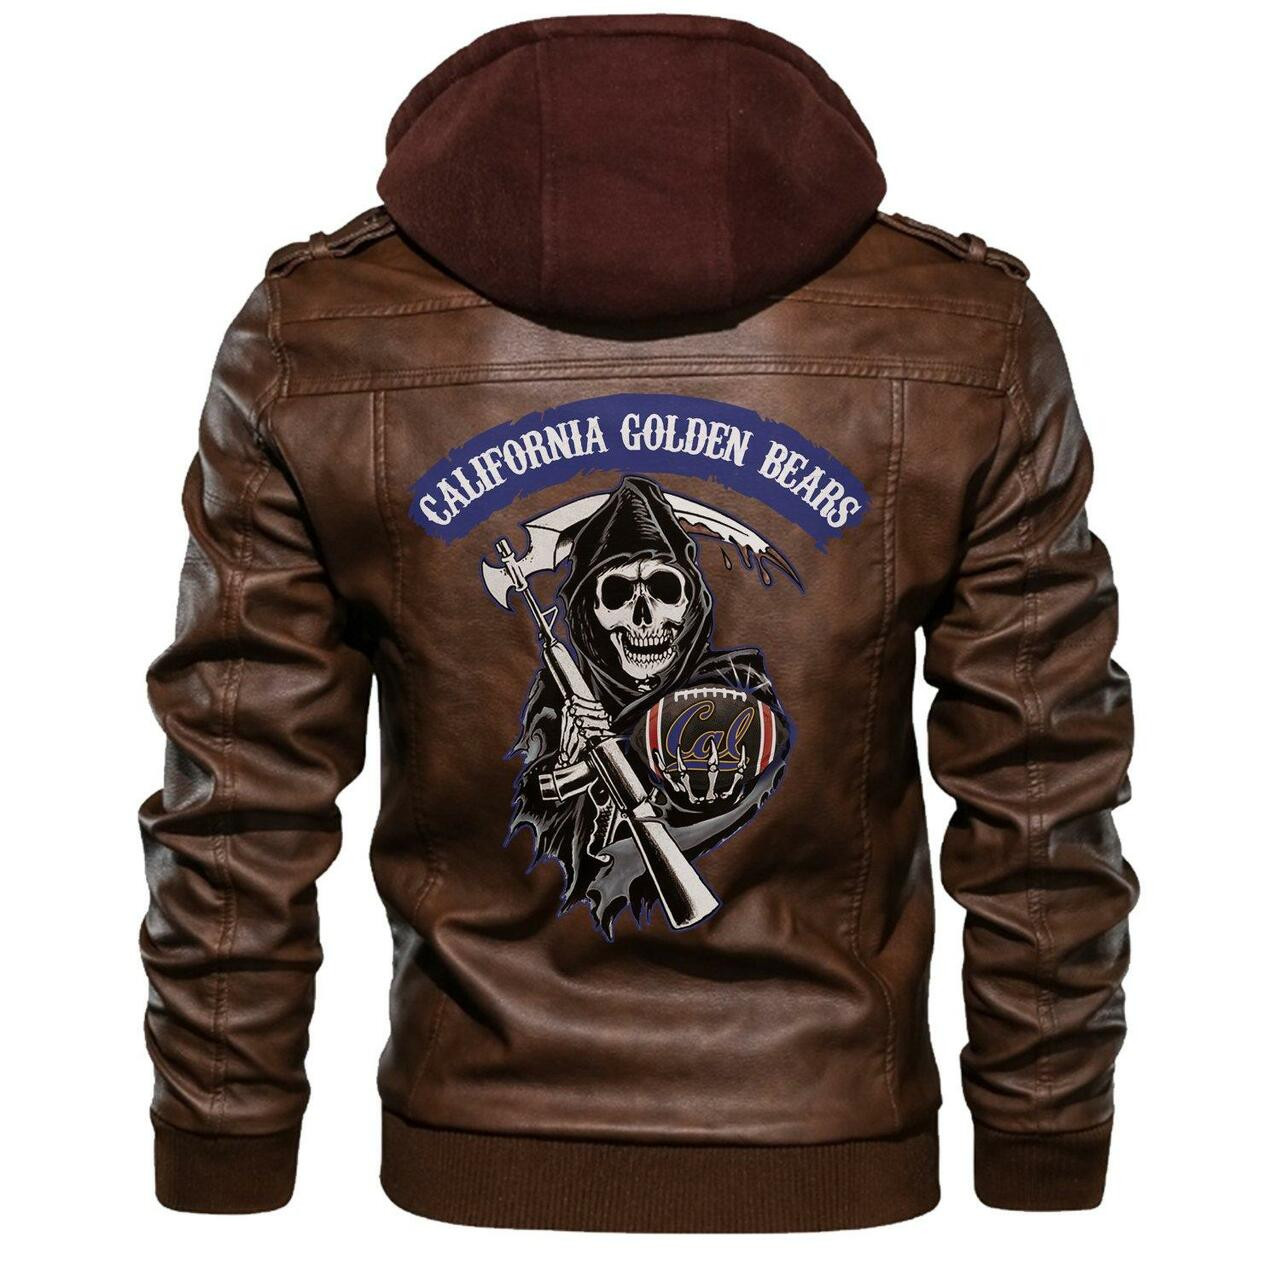 Check out and find the right leather jacket below 76